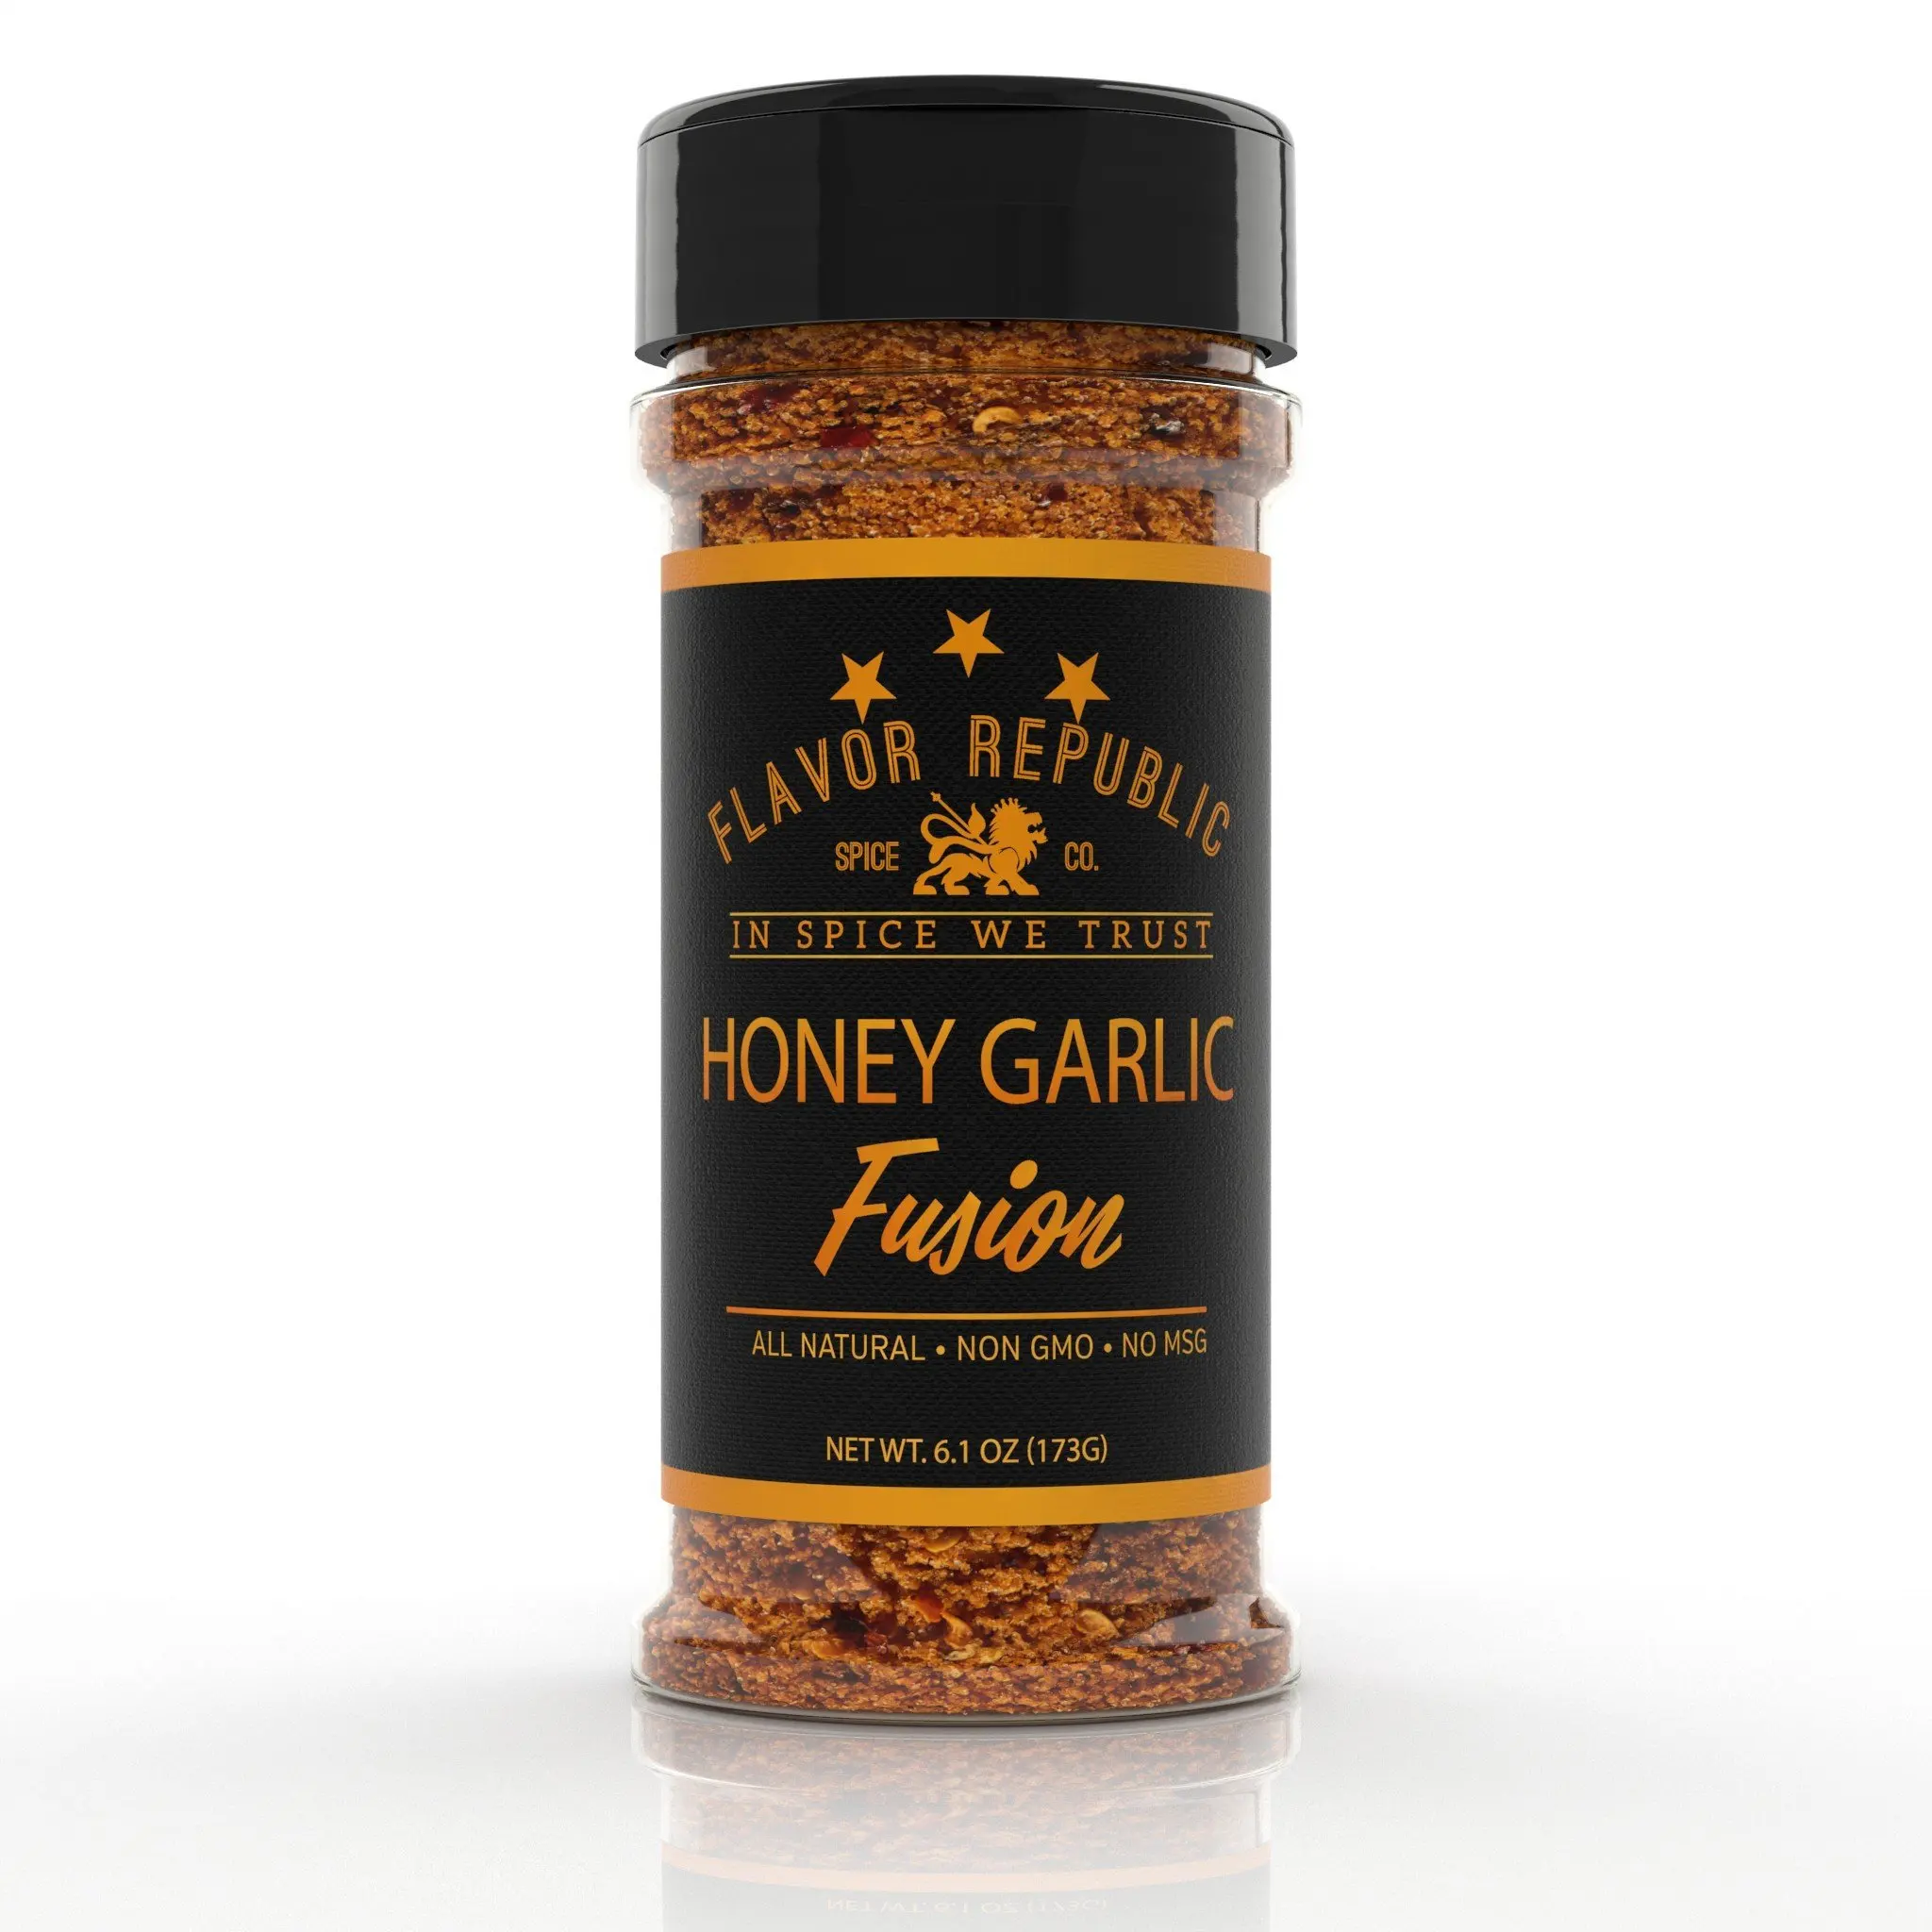 Honey Garlic Fusion is the perfect blend of two flavors that naturally comp...